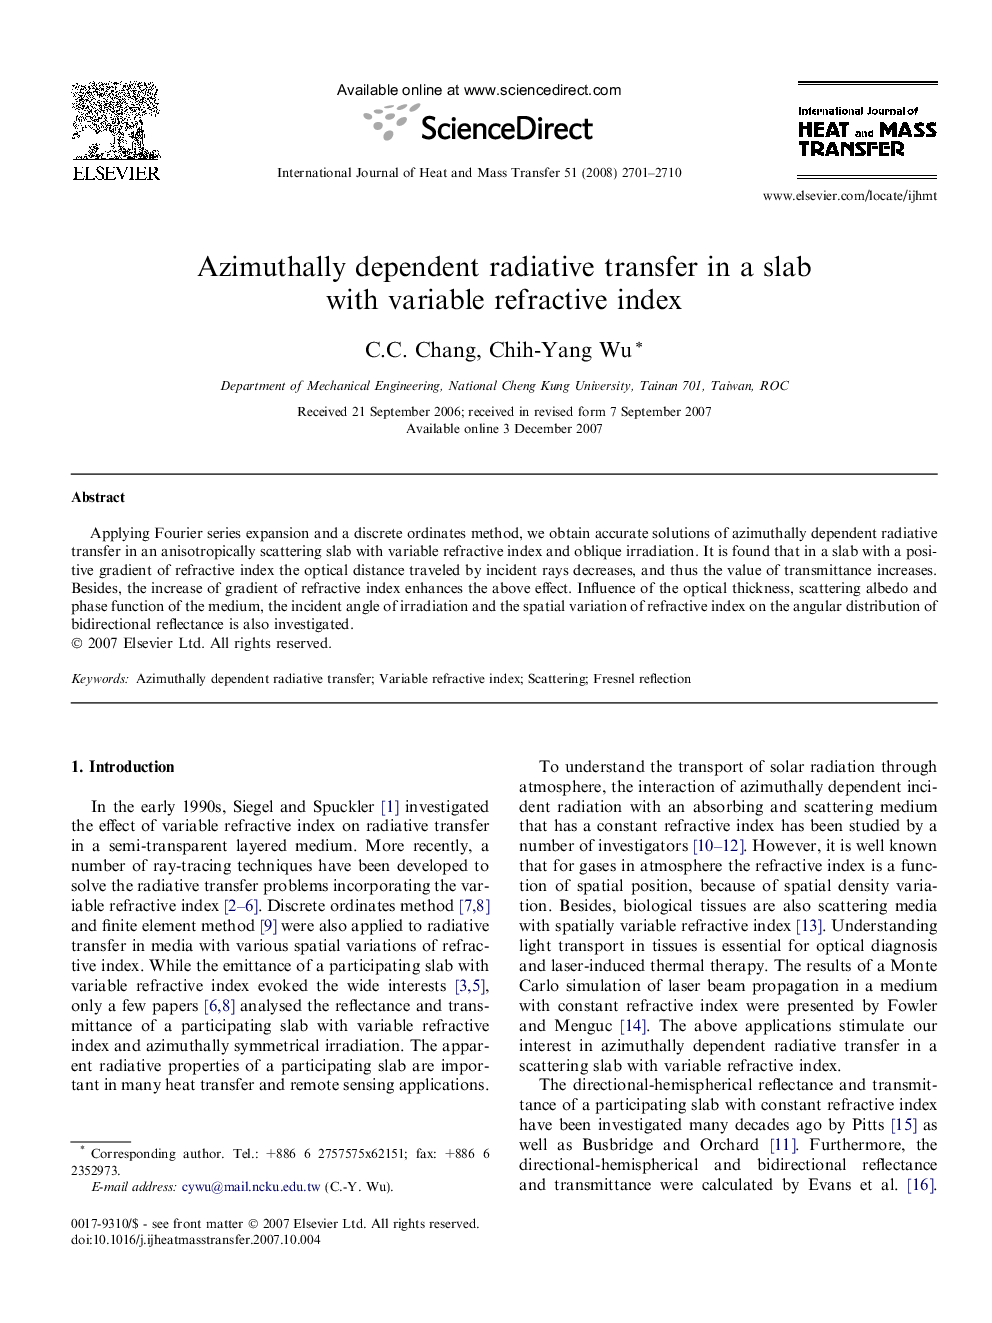 Azimuthally dependent radiative transfer in a slab with variable refractive index